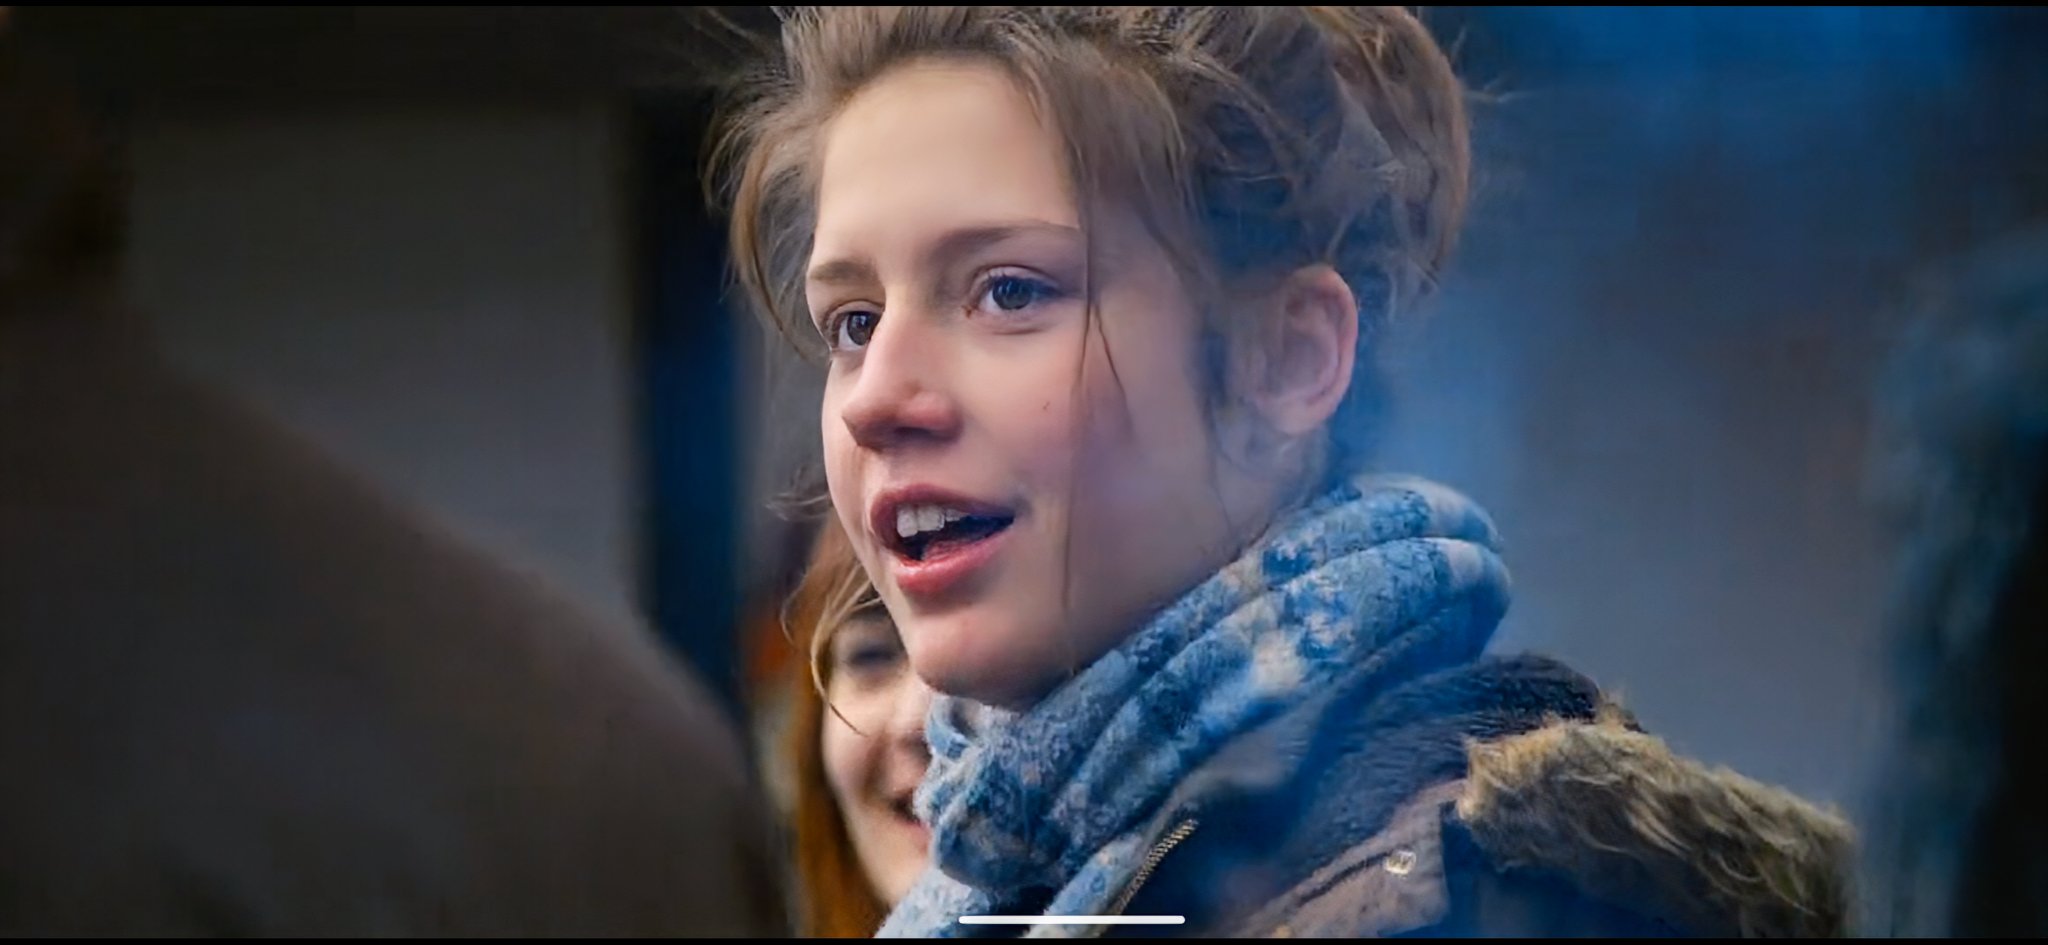 ADELE EXARCHOPOULOS - Página 6 GNins6kXIAE9Lul?format=jpg&name=large